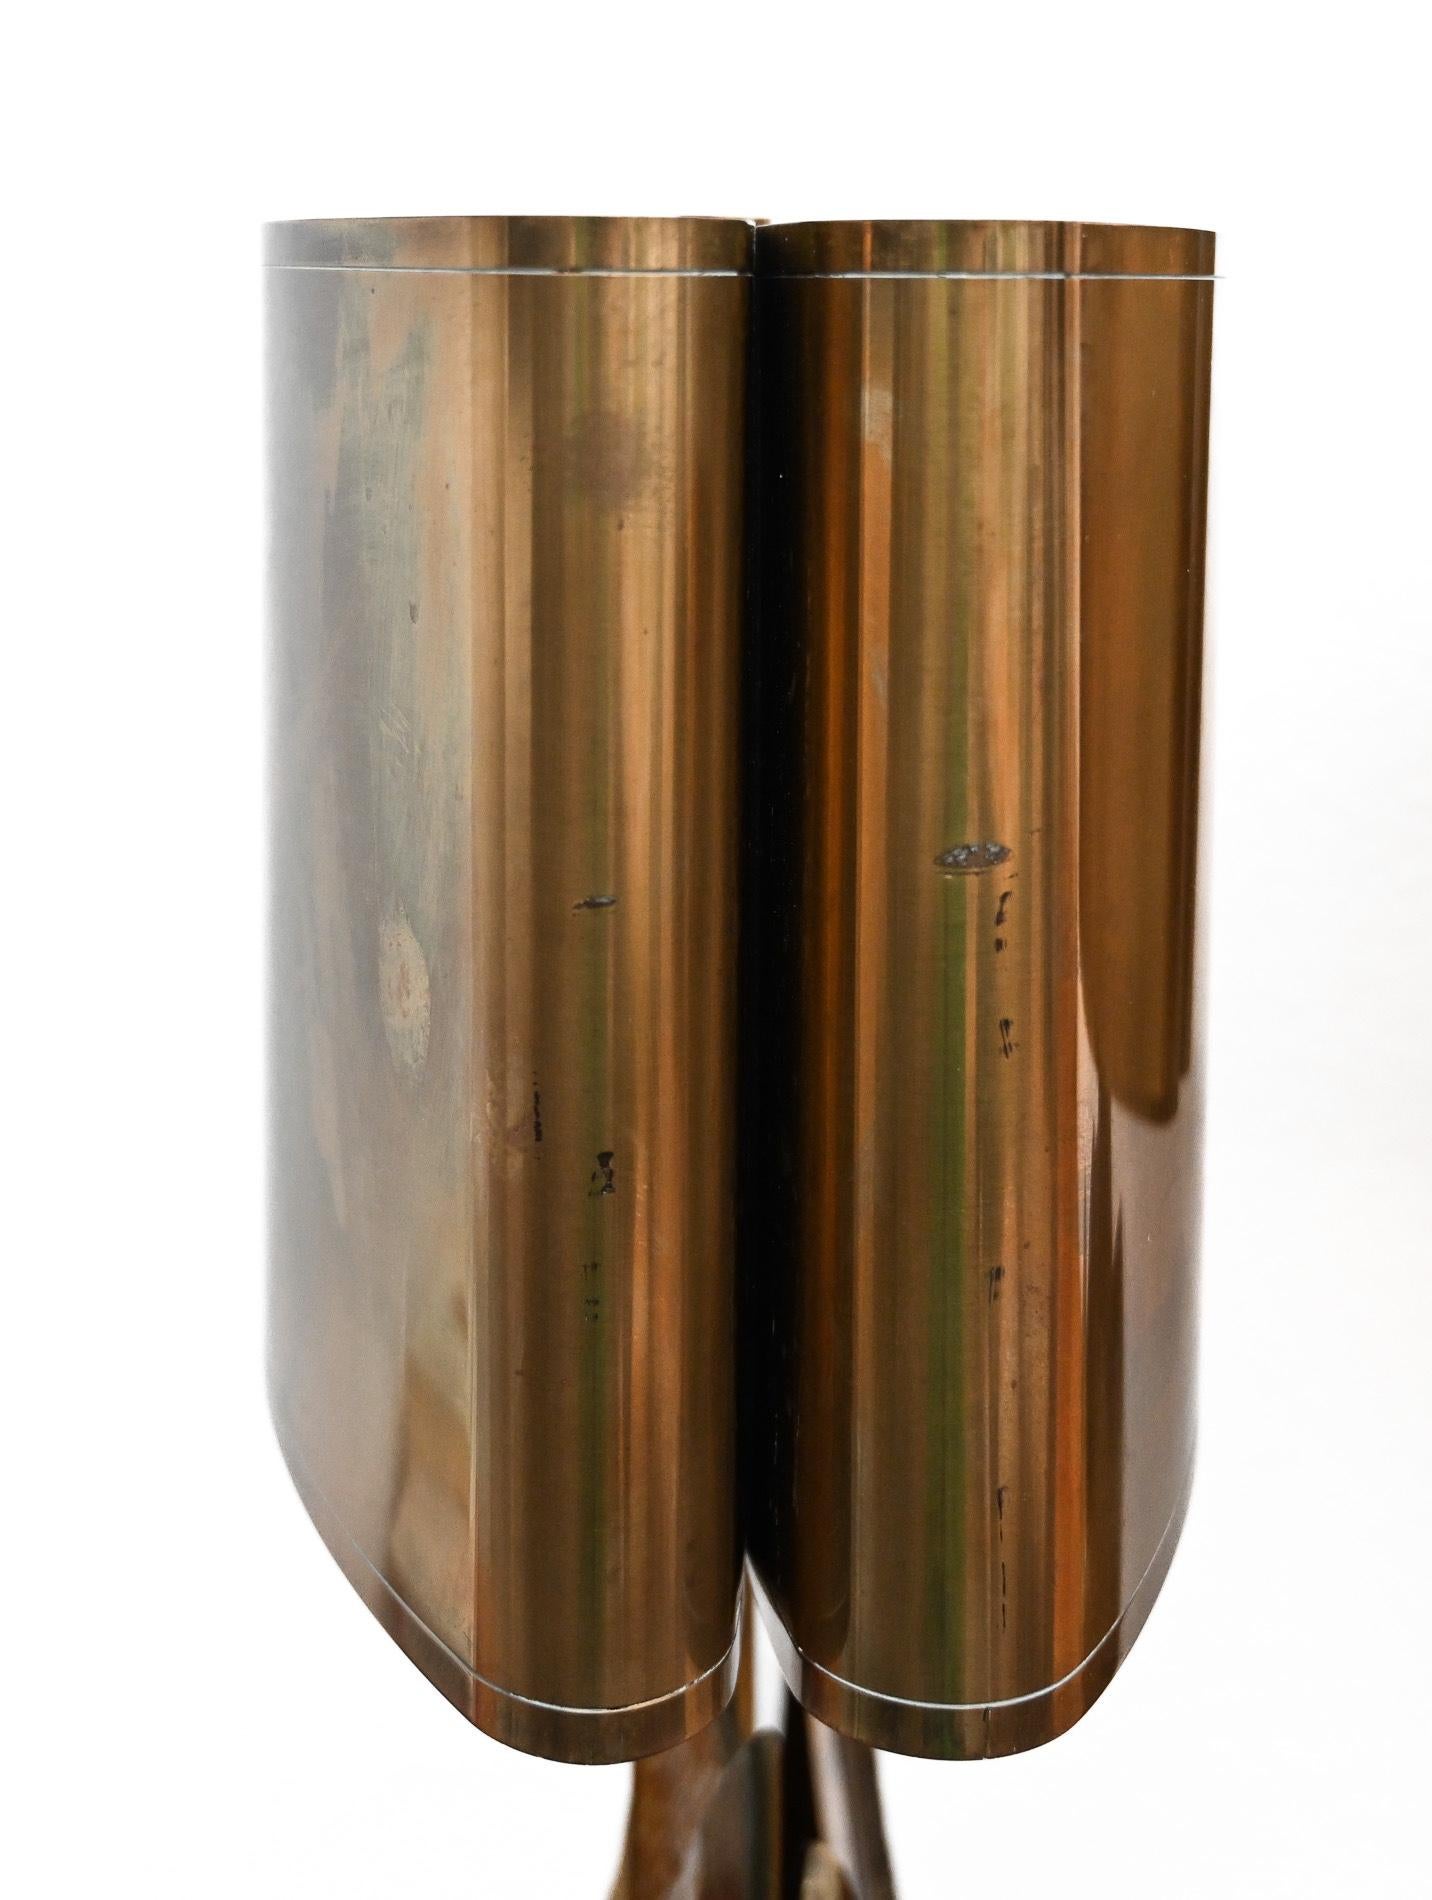 Pair of “Cythere” table lamps designed by Chrystiane Charles for Maison Charles. Gilded bronze and brass
Paris, circa 1980
(priced for the pair)

Chrystiane Charles is recognized as one of the foremost creative  bronze artists and sculptors in the